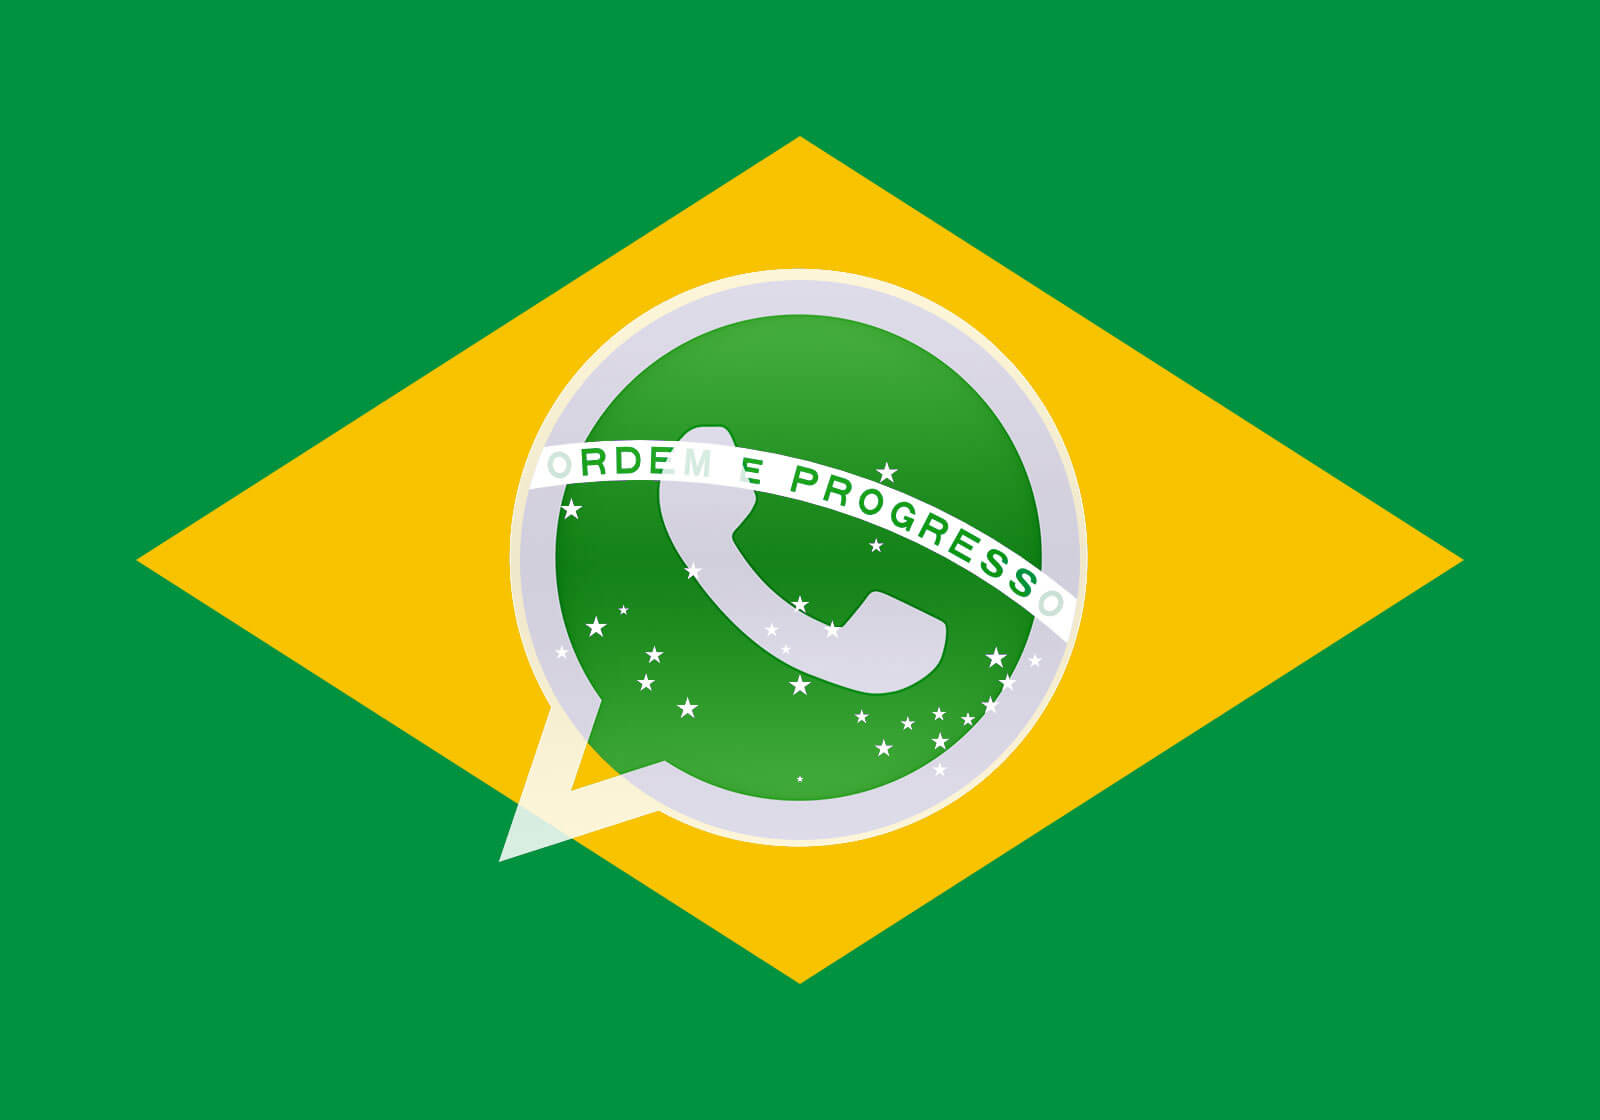 WhatsApp Brings Payments For People and Small Businesses in Brazil